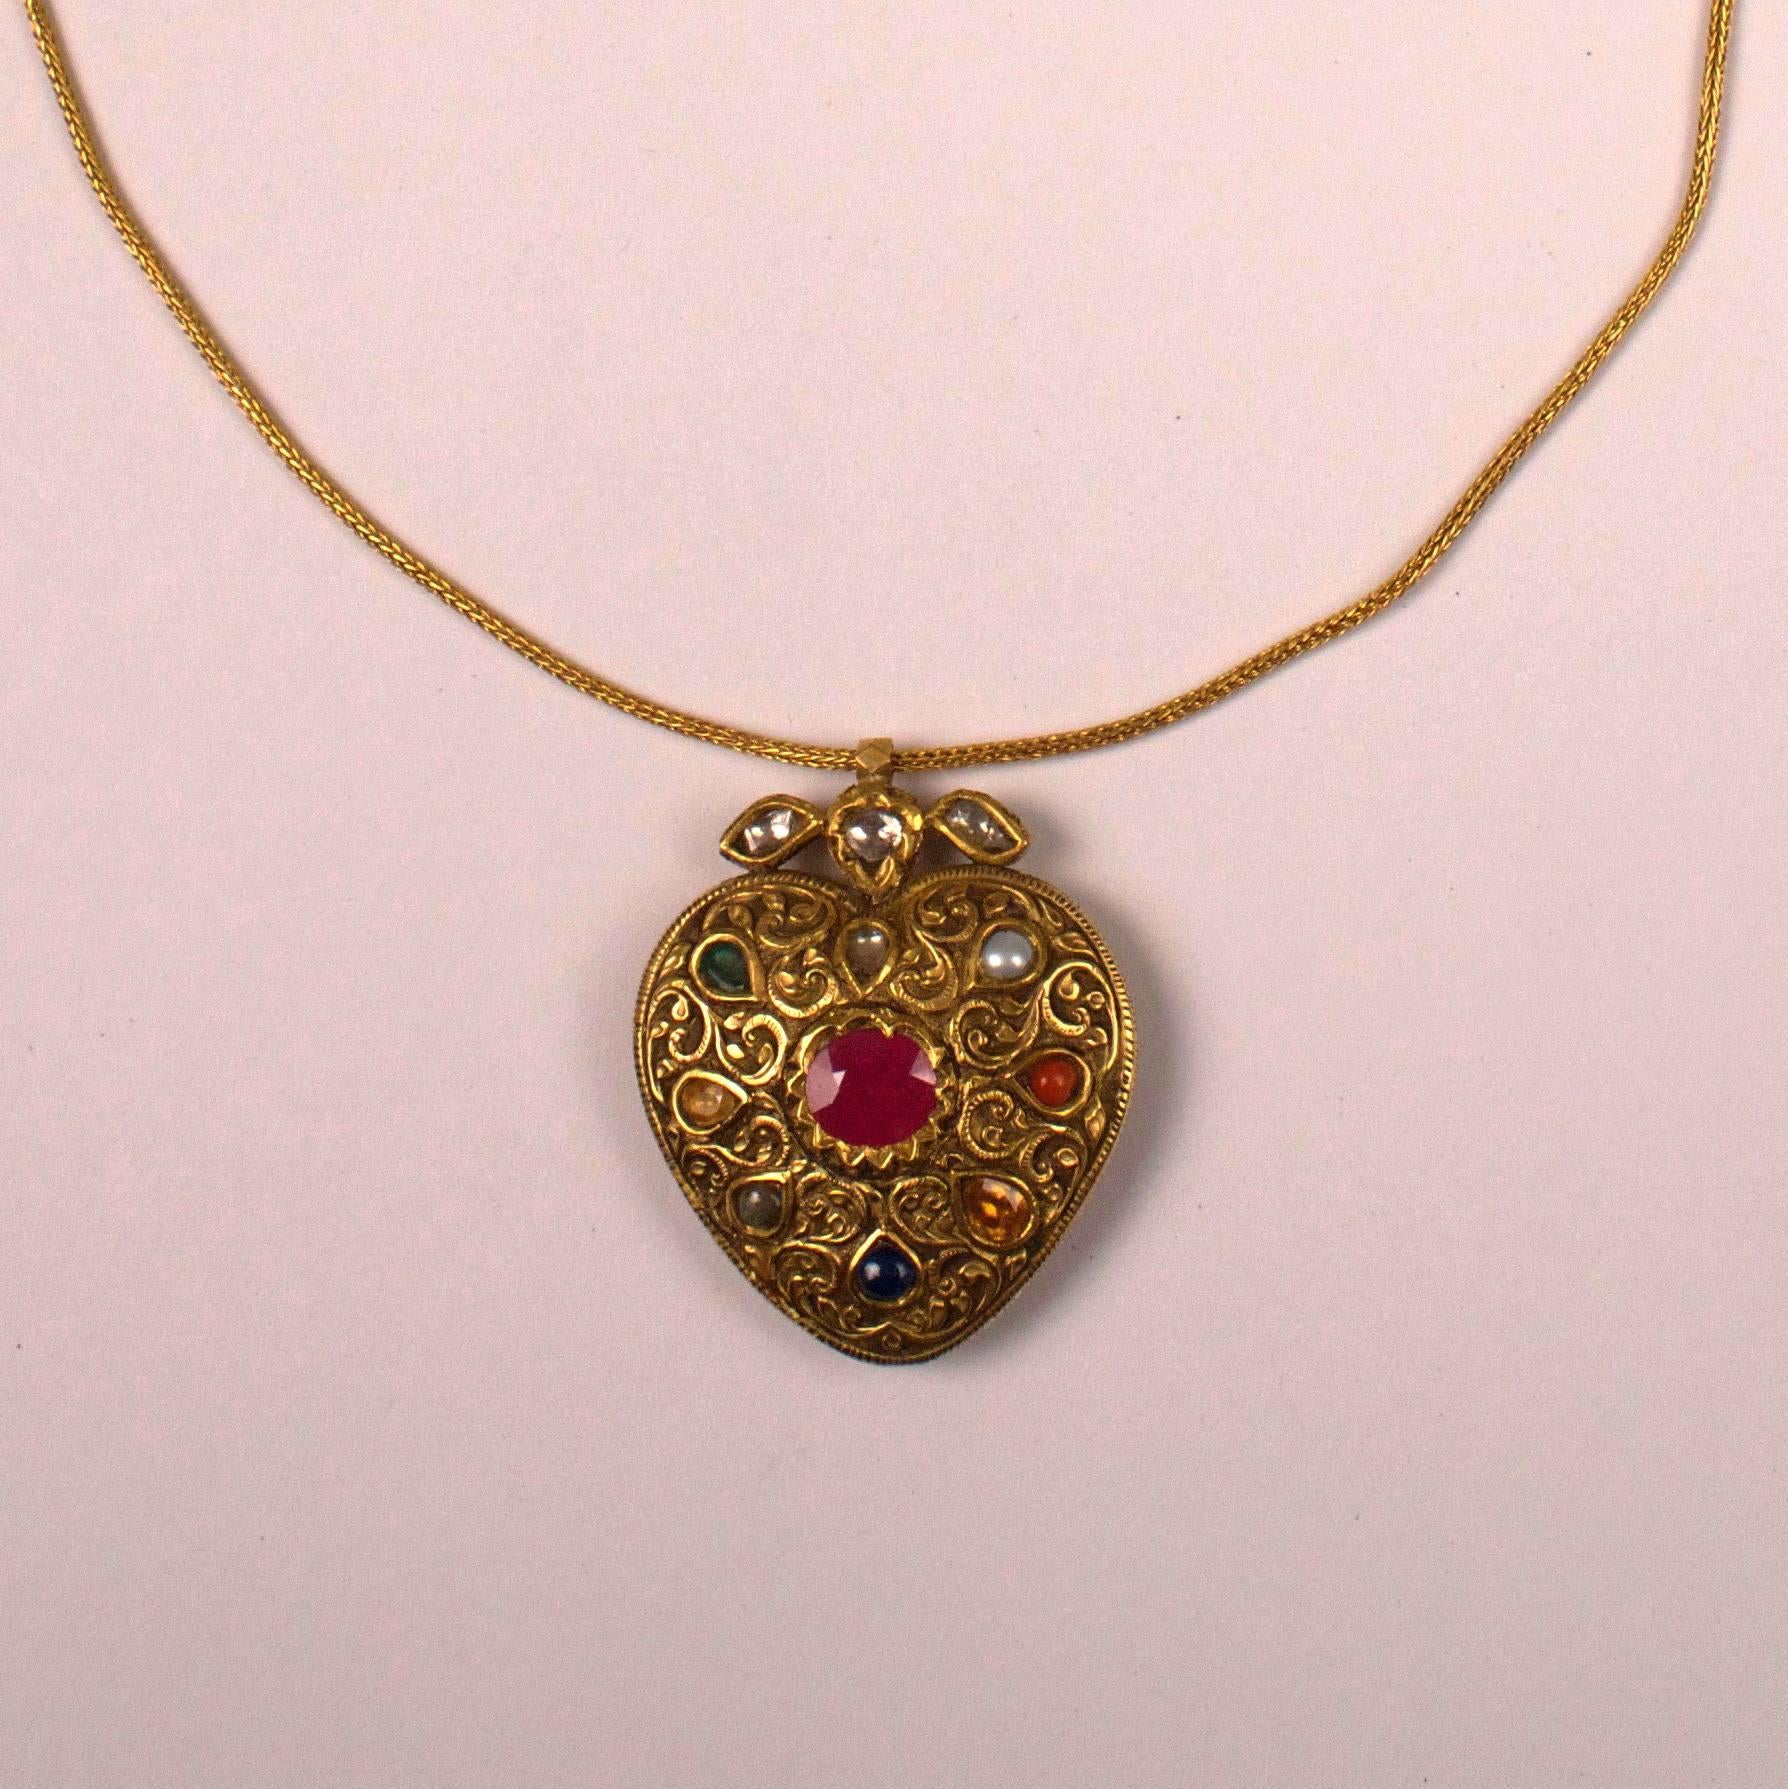 An 18-karat gold heart-shaped Navaratna necklace with nine gemstones representing the planets. Adorned with a tooled floral design on front and back, this traditional pendant from Rajasthan, India features (clockwise) a diamond, pearl, coral,